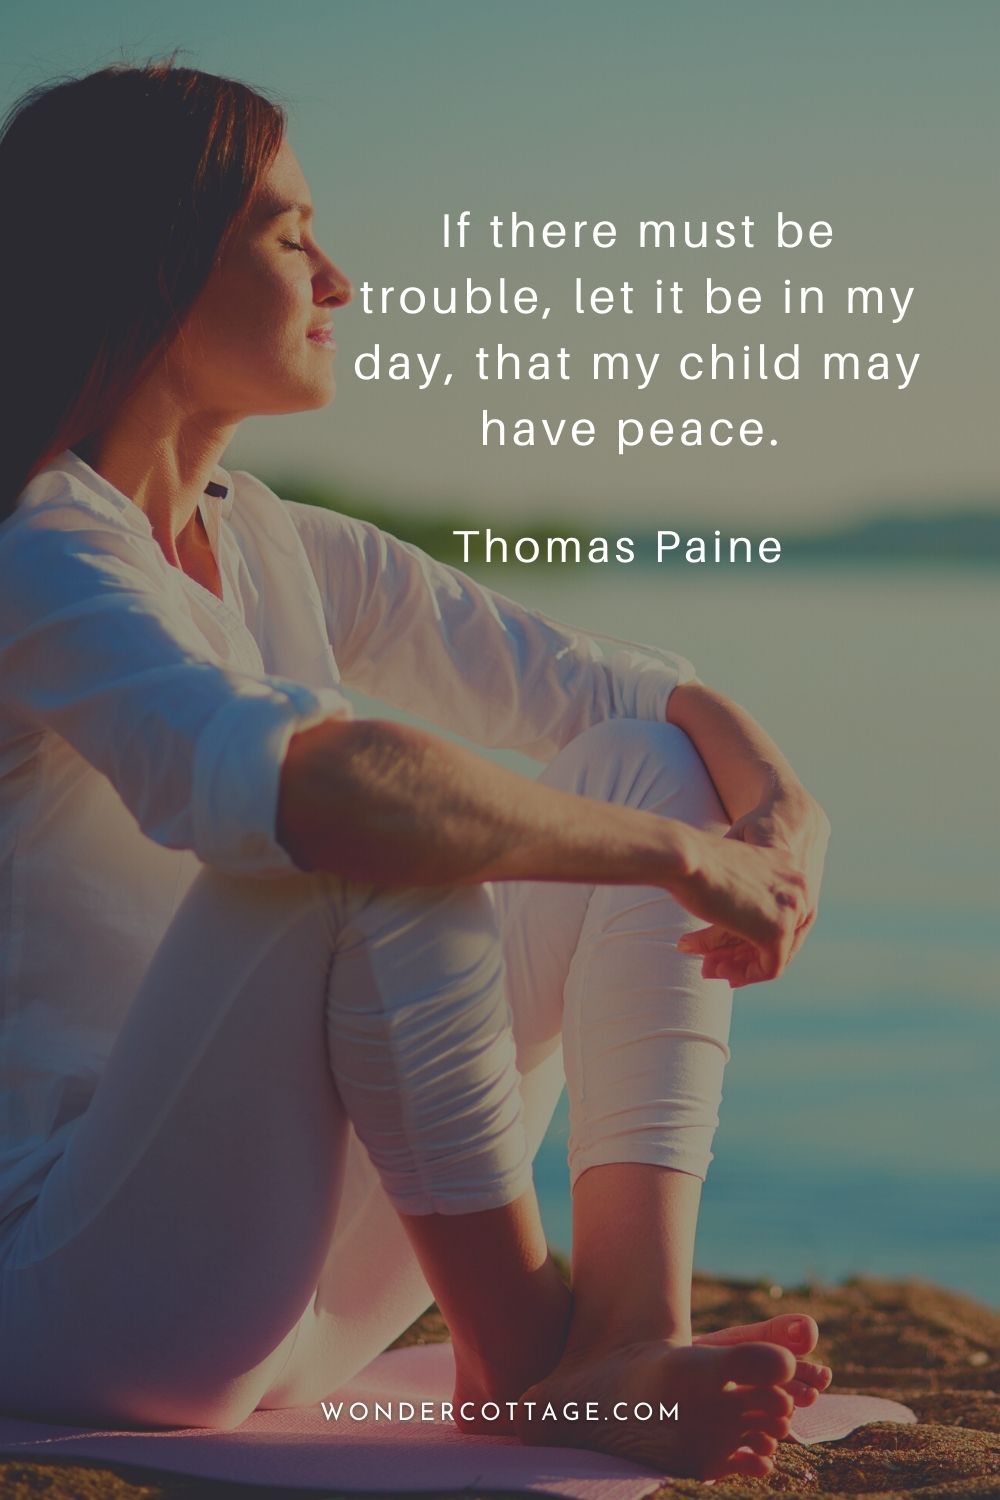 If there must be trouble, let it be in my day, that my child may have peace.  Thomas Paine